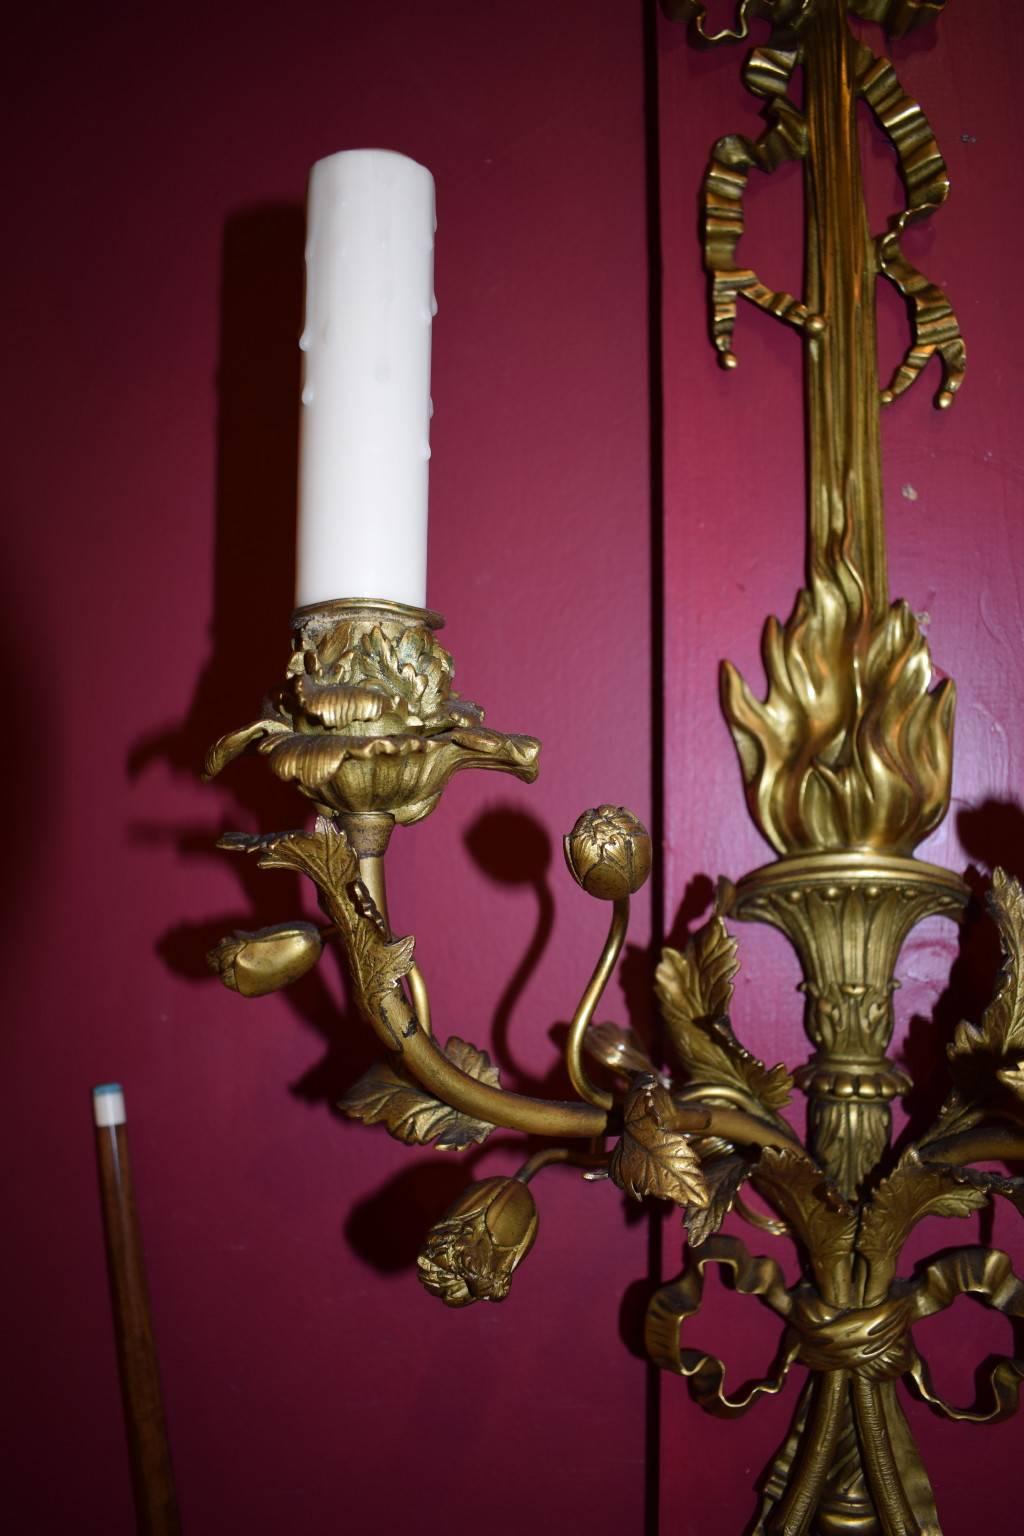 A truly magnificent pair of wall sconces, superb detail and craftsmanship, even the most minute details in the leaves and flowers are carefully rendered. A feast for the eyes! Gilt bronze with two lights.